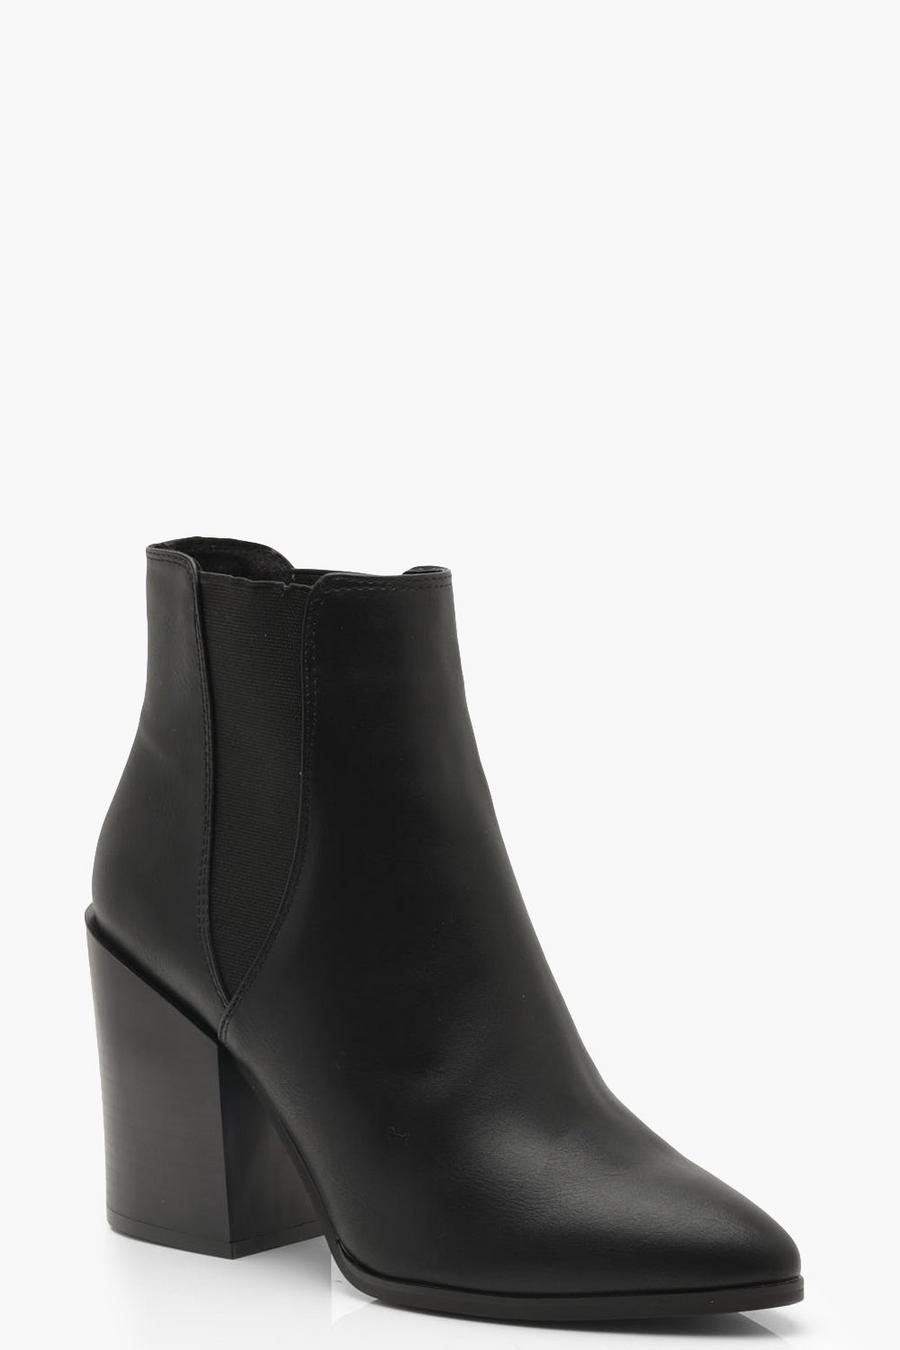 Pointed Chelsea Style Western Boots | Boohoo UK